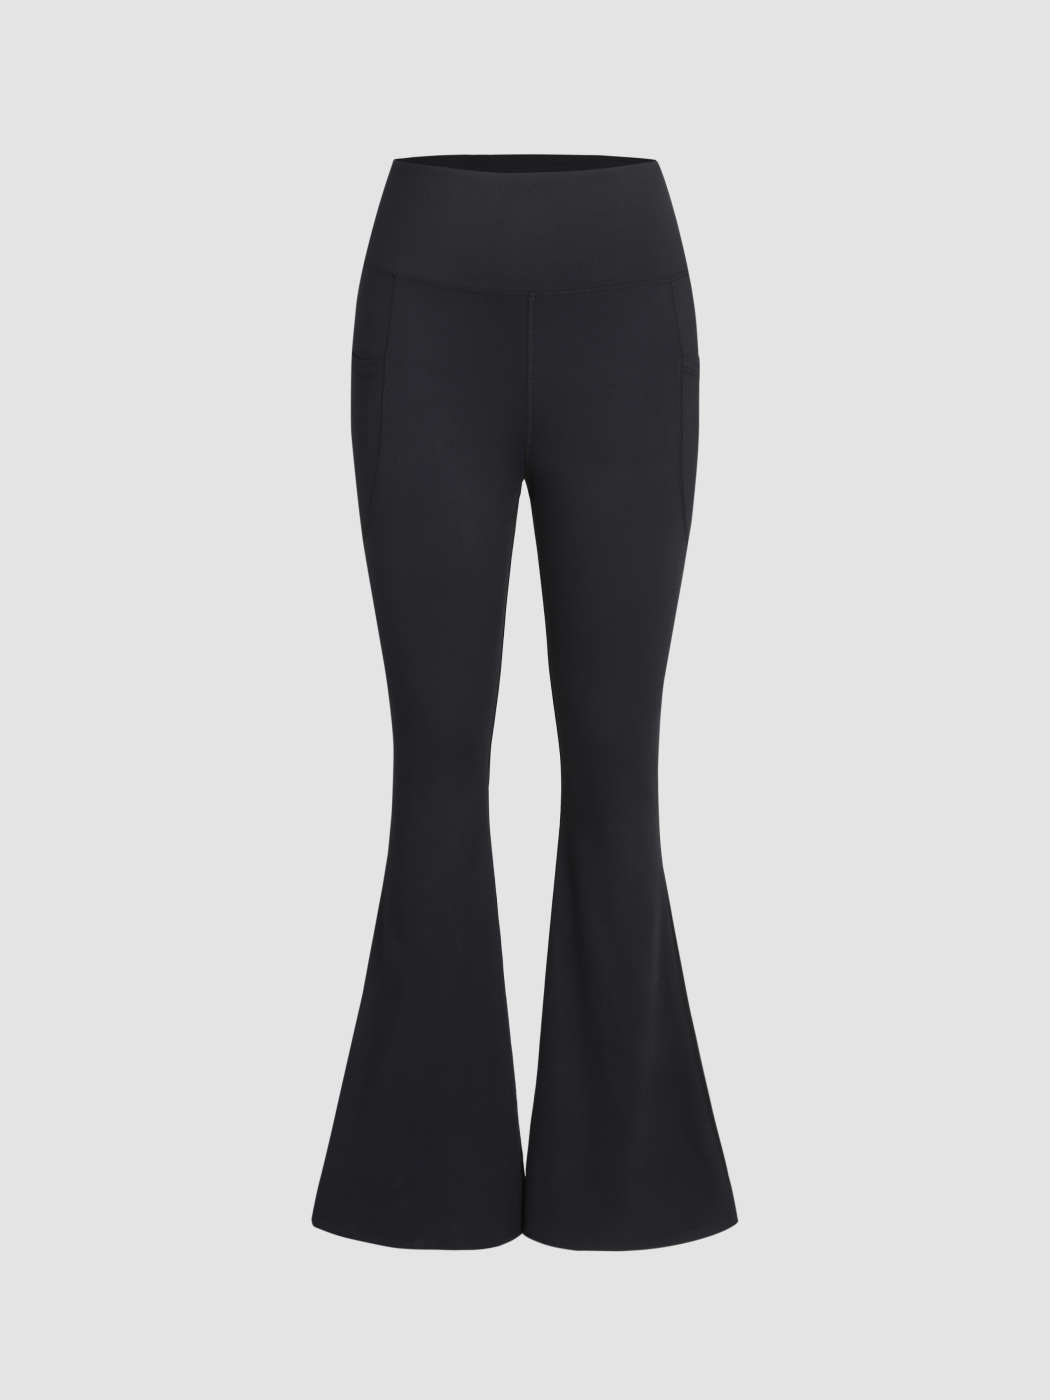 High Waist Solid Flared Leggings Sporty by Cider